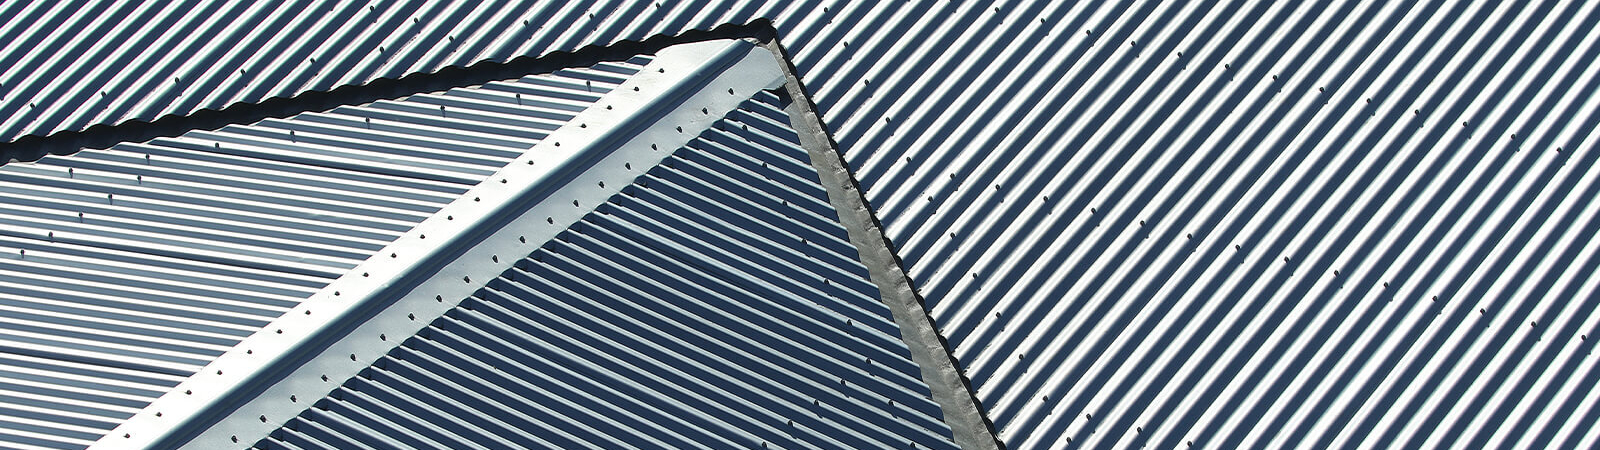 High quality repaired metal roof in daylight